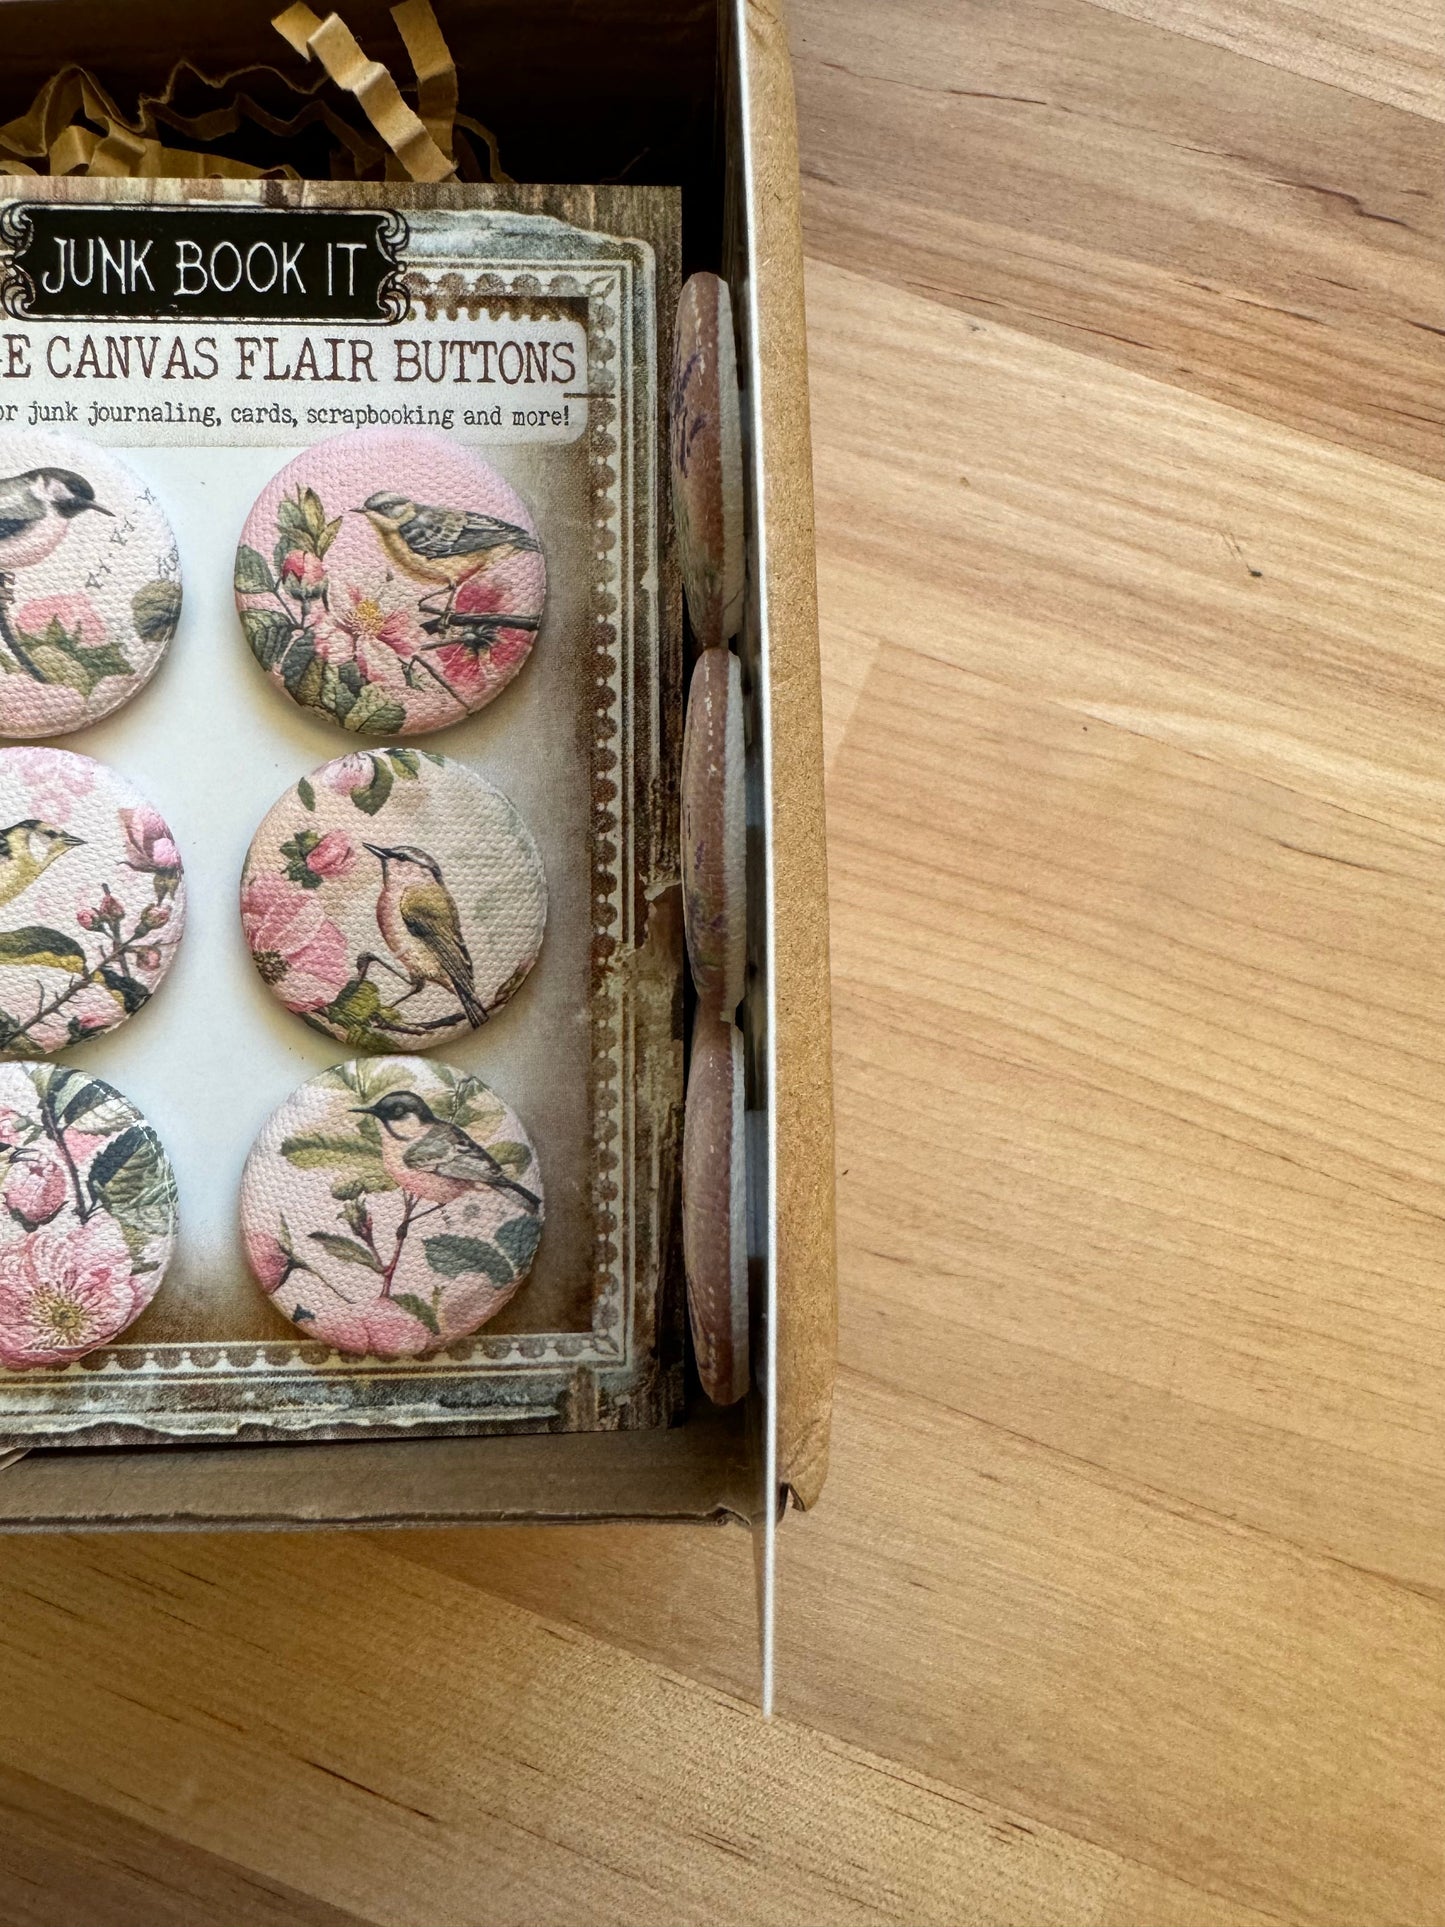 Vintage Floral Bee Canvas Flair Buttons